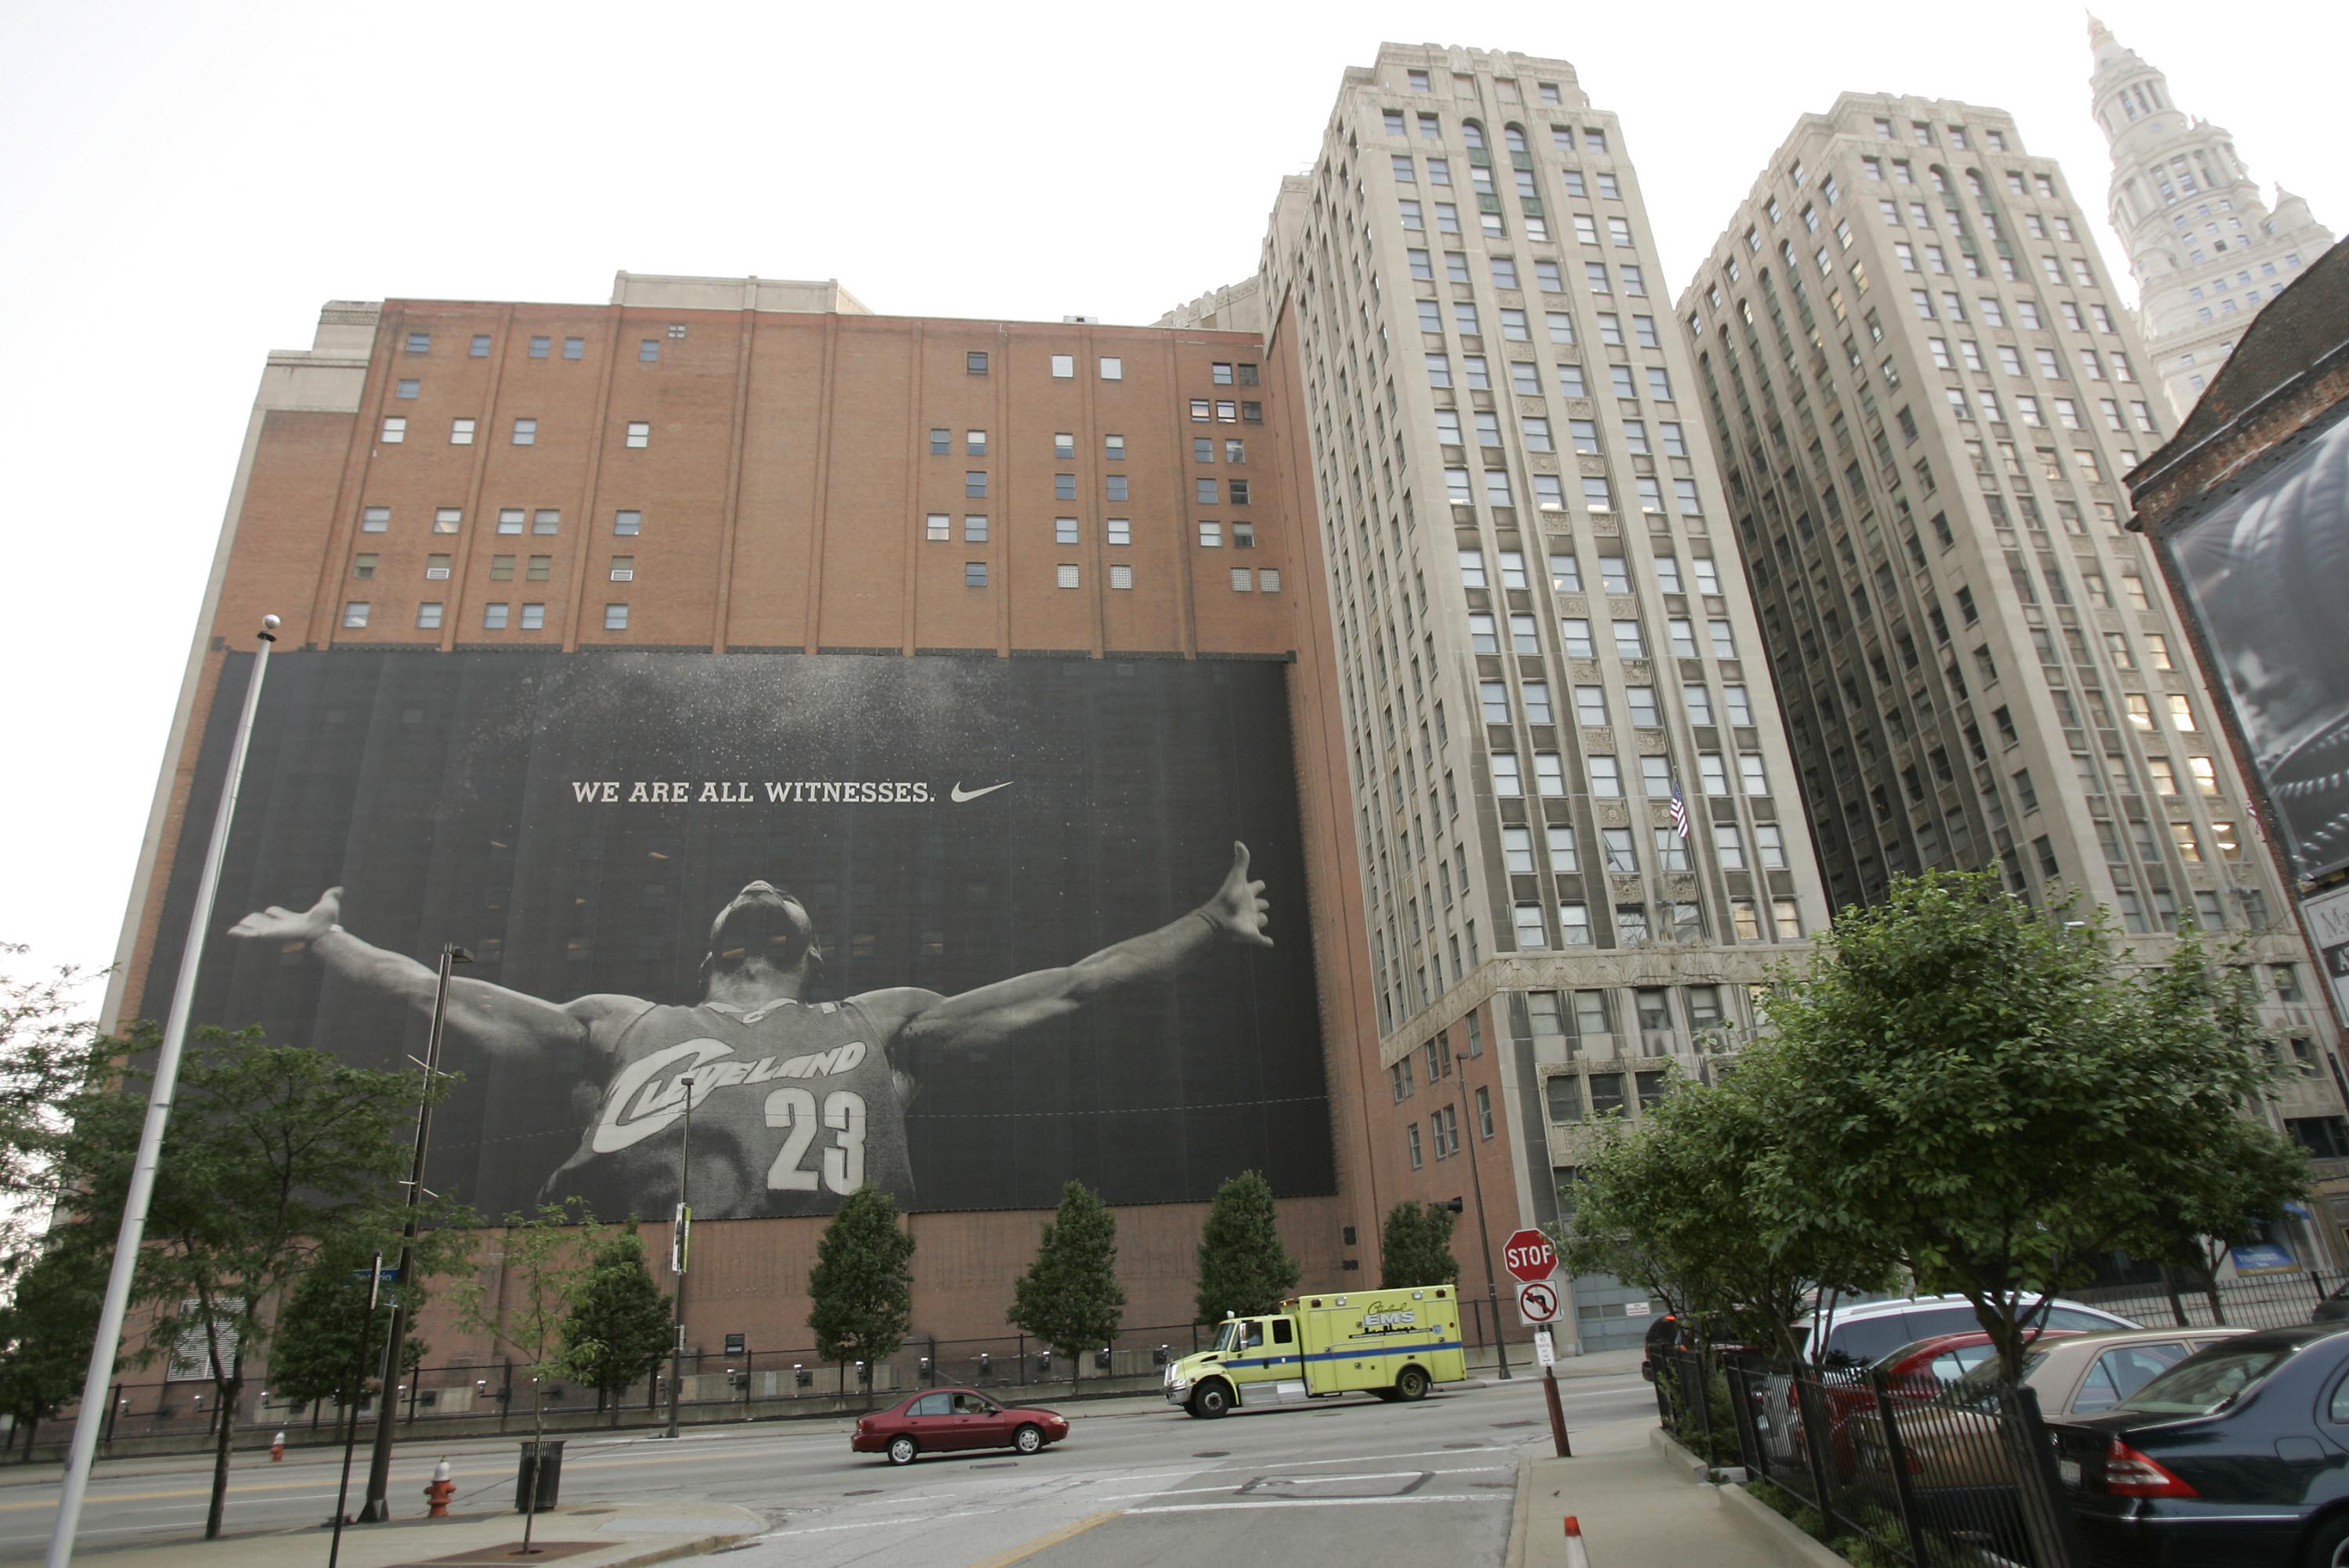 CLEVELAND - JULY 8:  A larger than life photograph of LeBron James is displayed July 8, 2010 in Cleveland, Ohio. The two-time Most Valuable Player has the choice of remaining with the Cleveland Cavaliers or signing with a new team. (Photo by J.D. Pooley/G